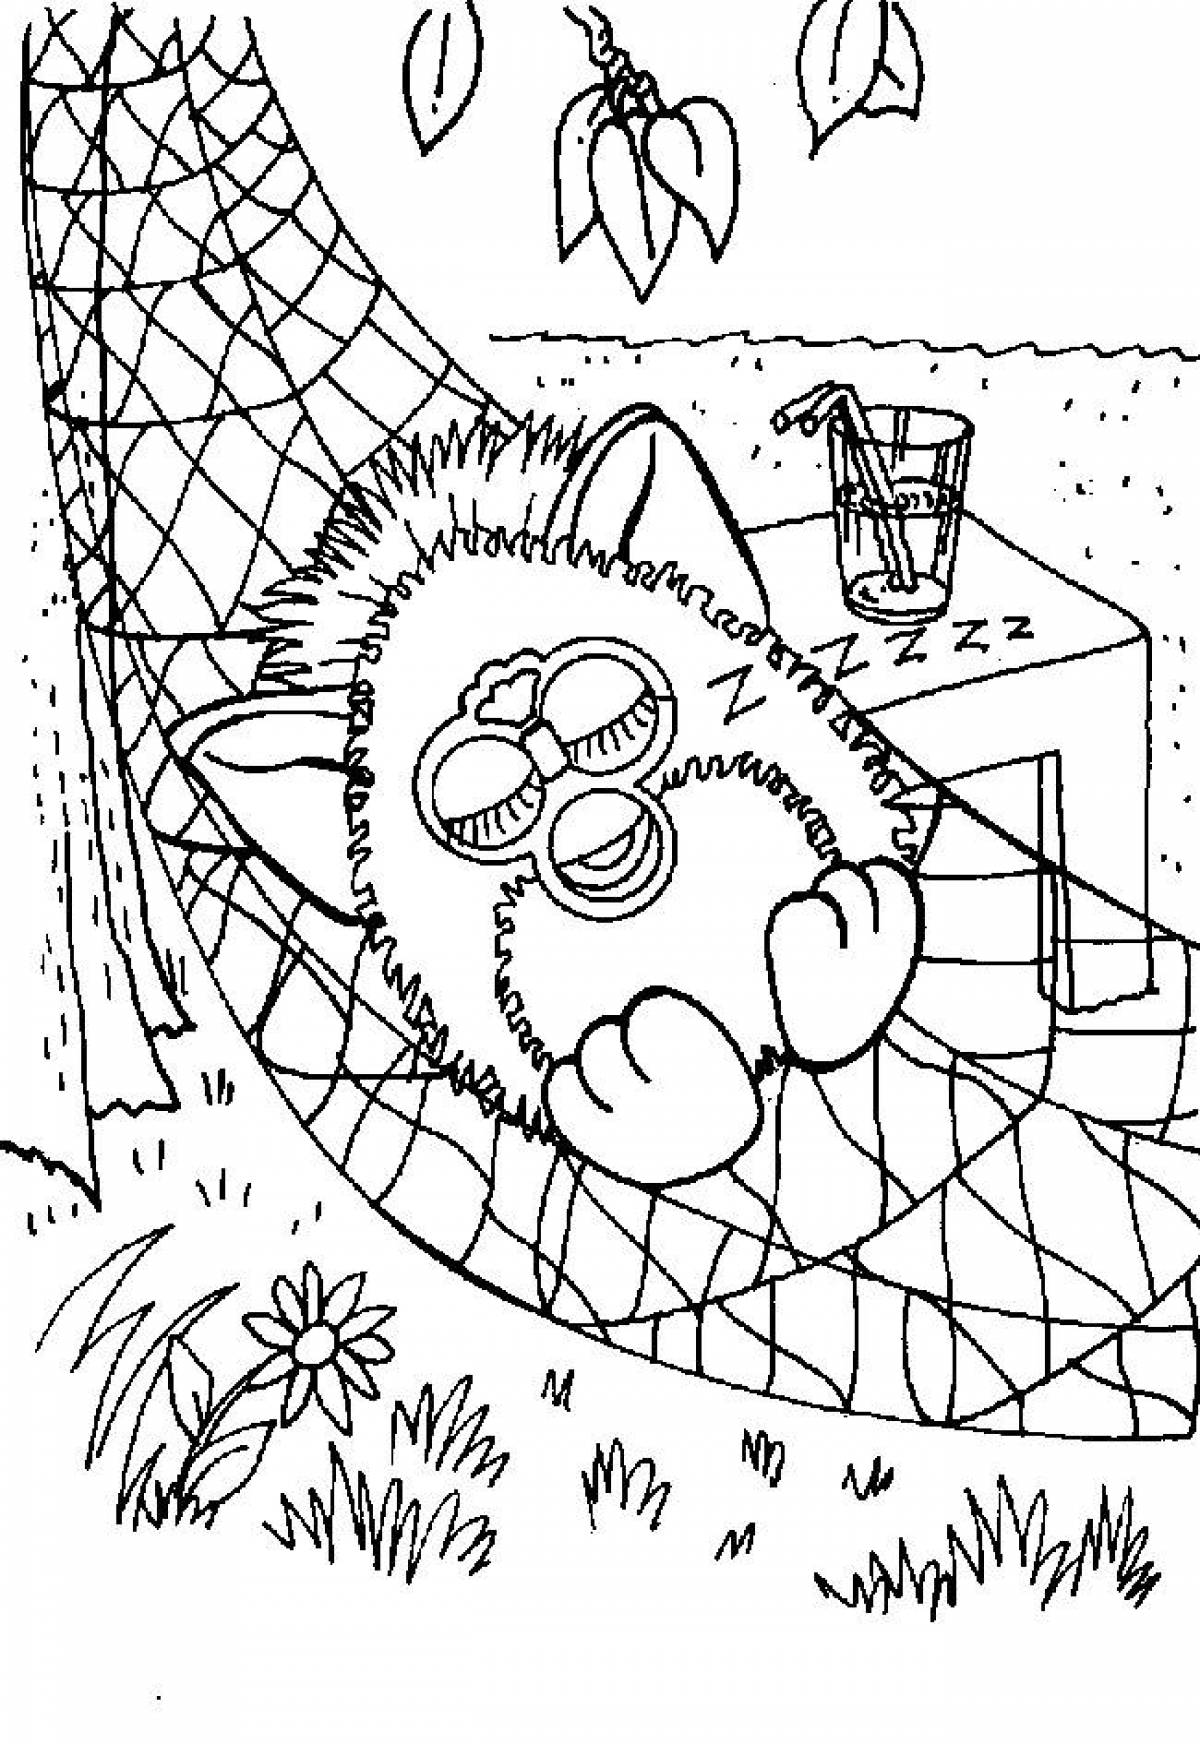 Photo Coloring book for children Furby is resting